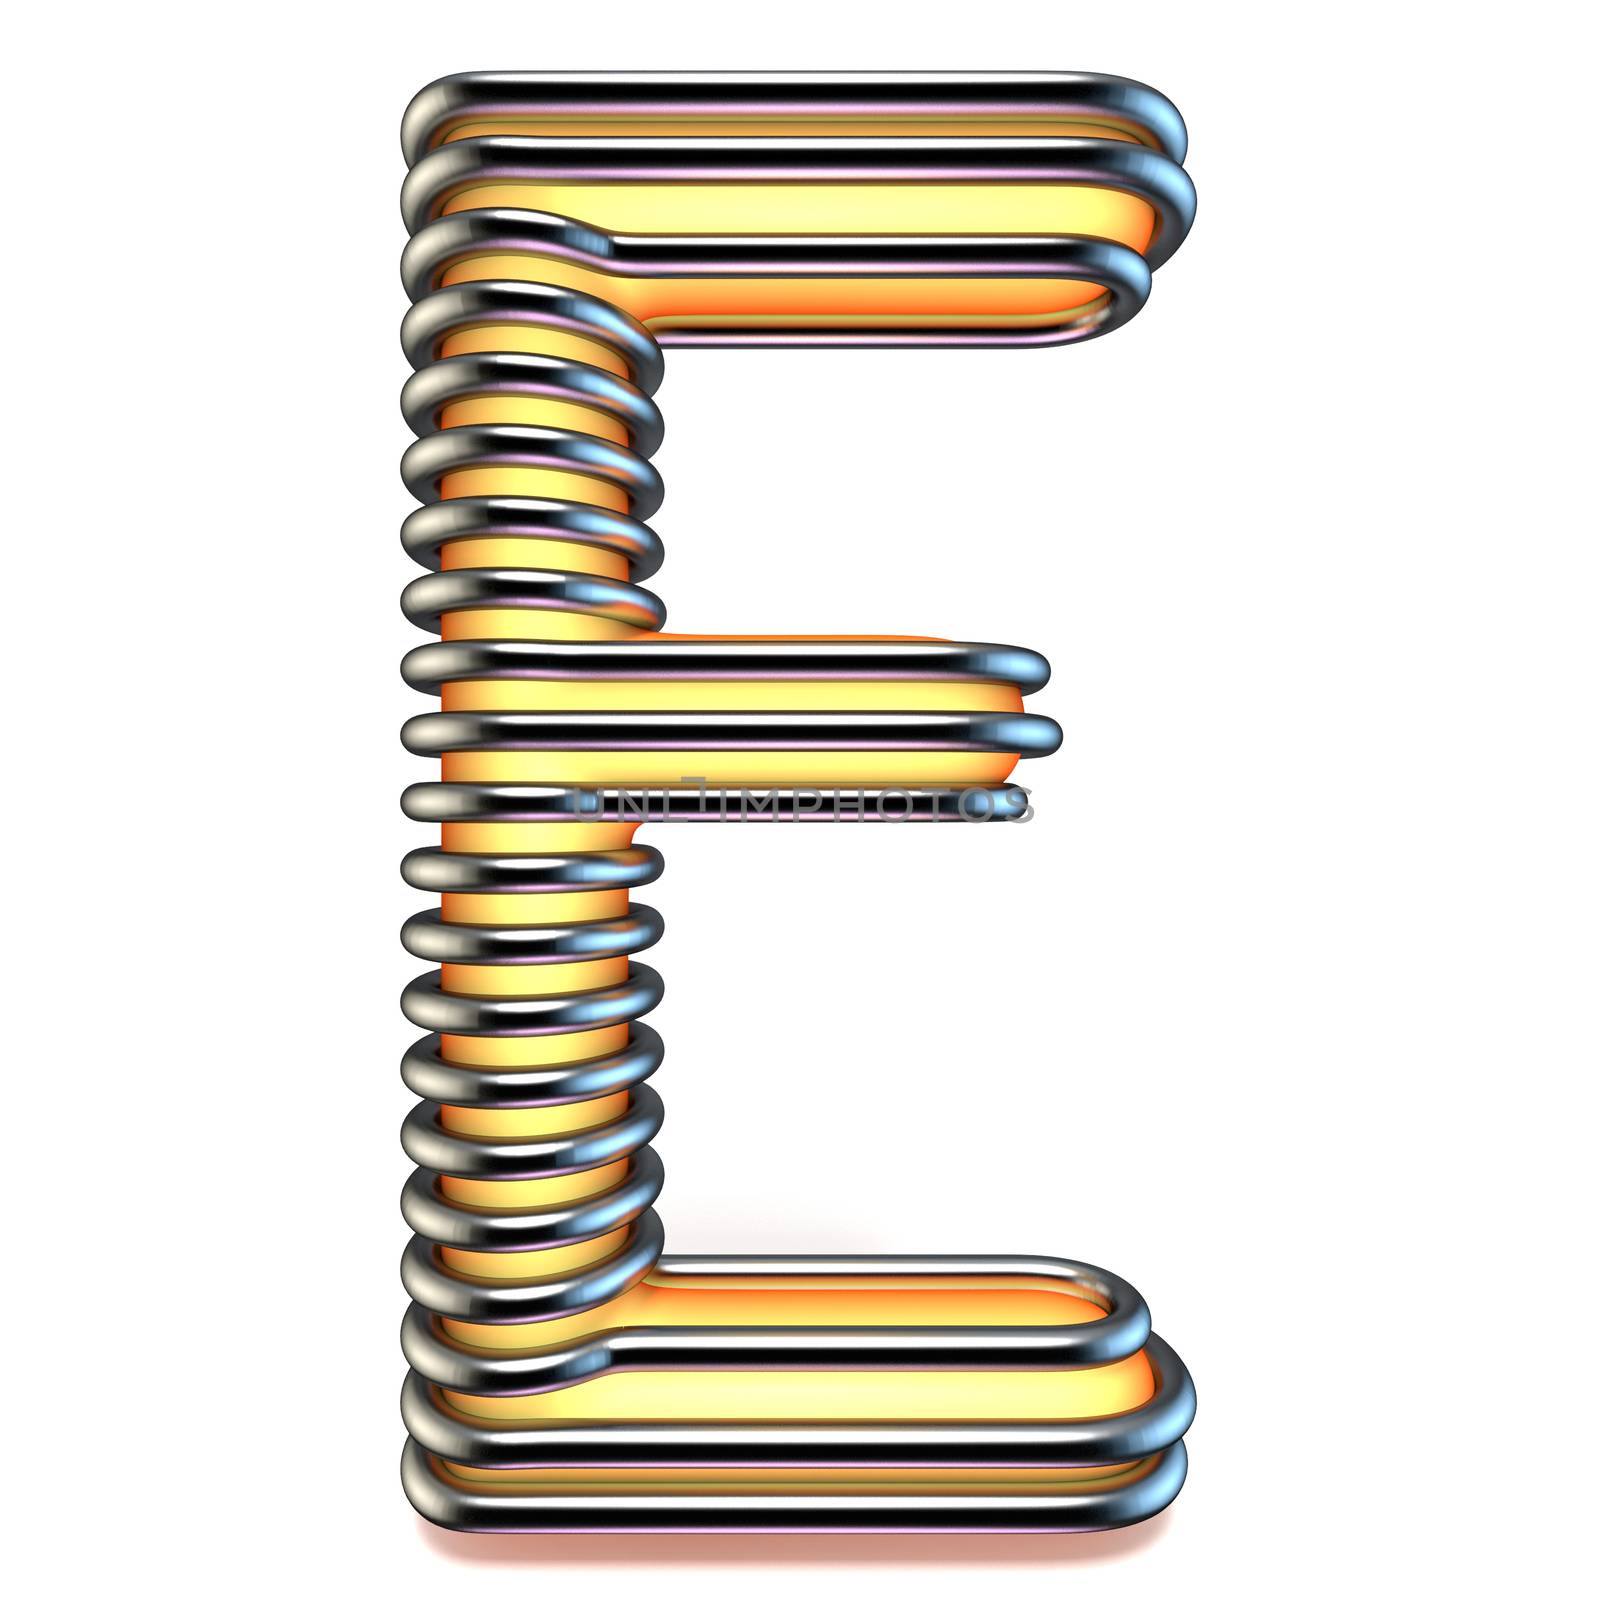 Orange yellow letter E in metal cage 3D render illustration isolated on white background